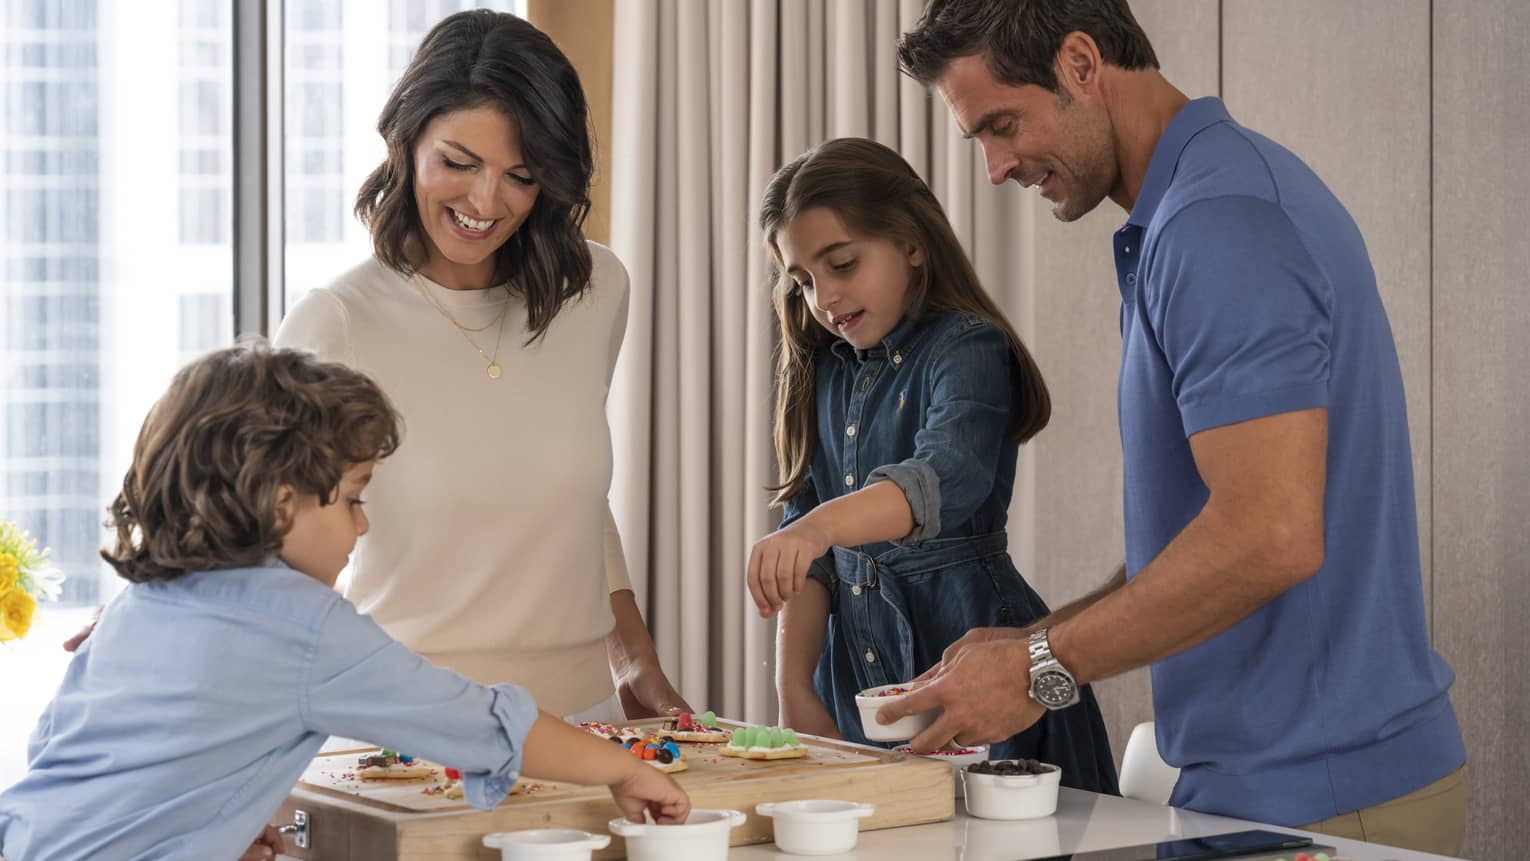 Woman, man, young girl and young boy decorate cookies at kitchen island